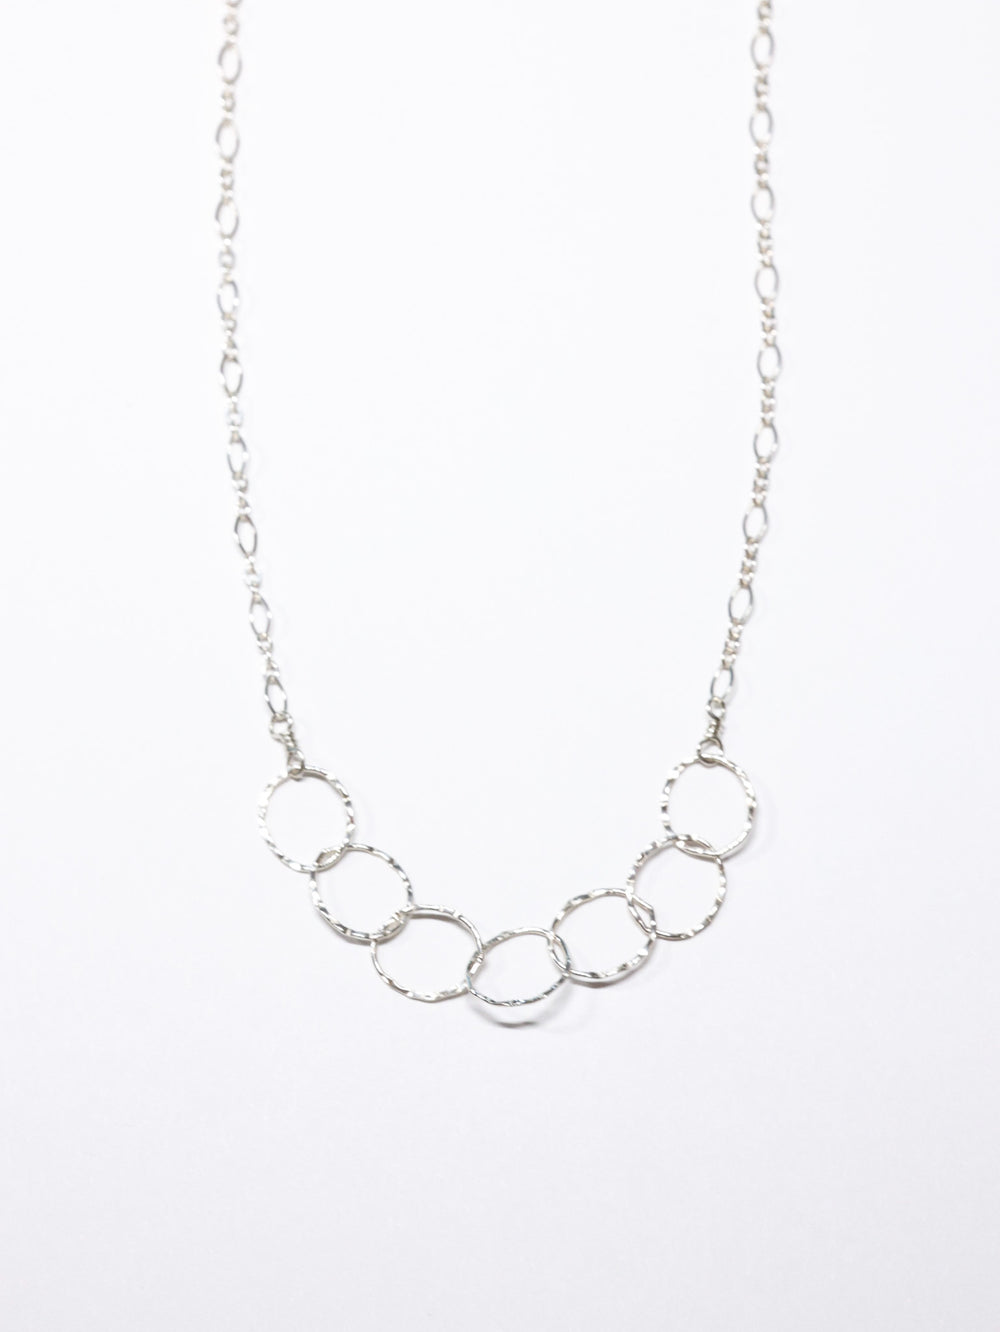 Medium Circles Necklace -Sterling Silver